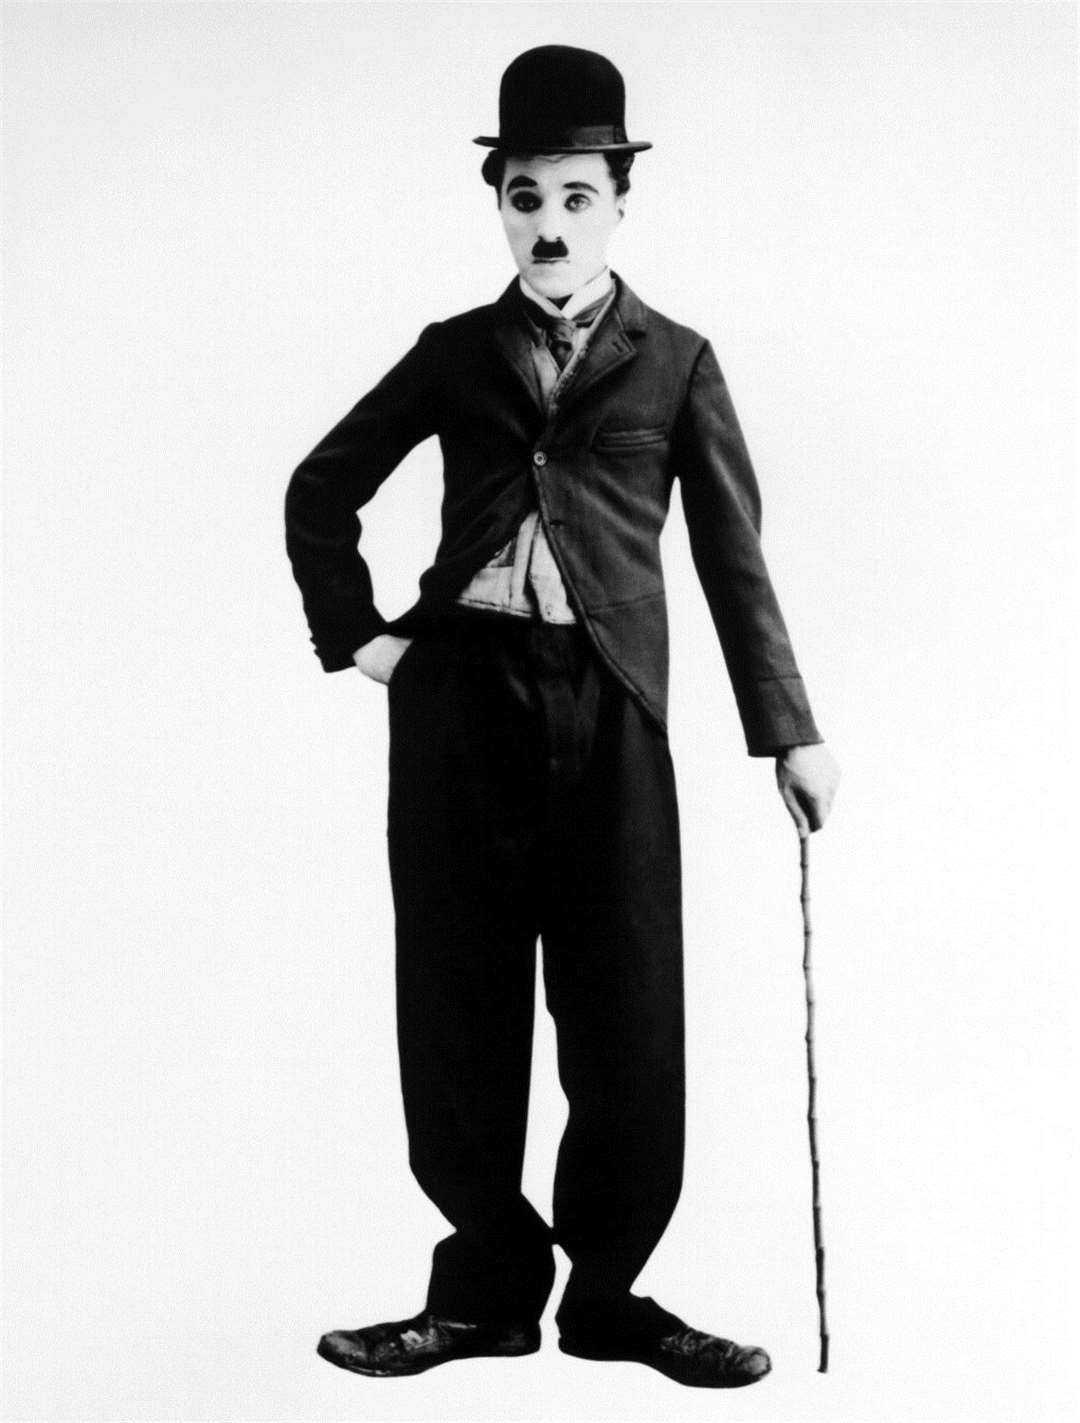 Charlie Chaplin appeared on stage at the Theatre Royal Chatham